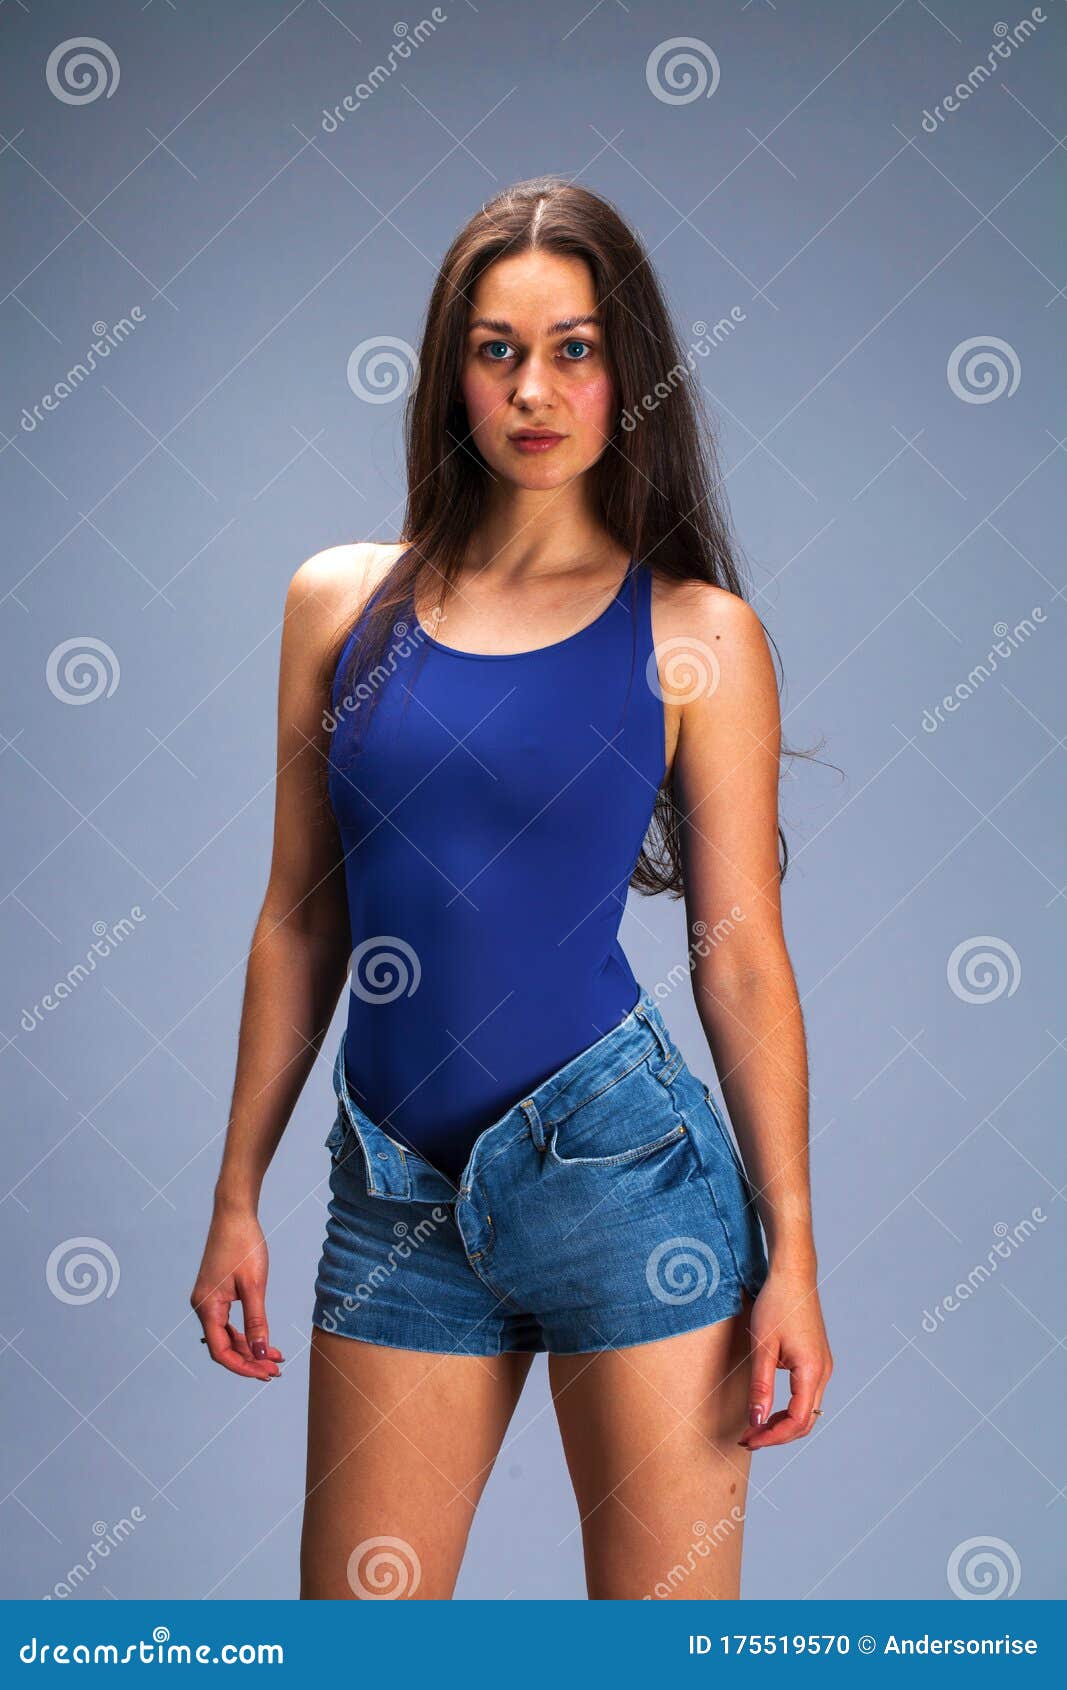 Brunette Woman in Blue Bathing Suit and Jeans Shorts Posing in the ...